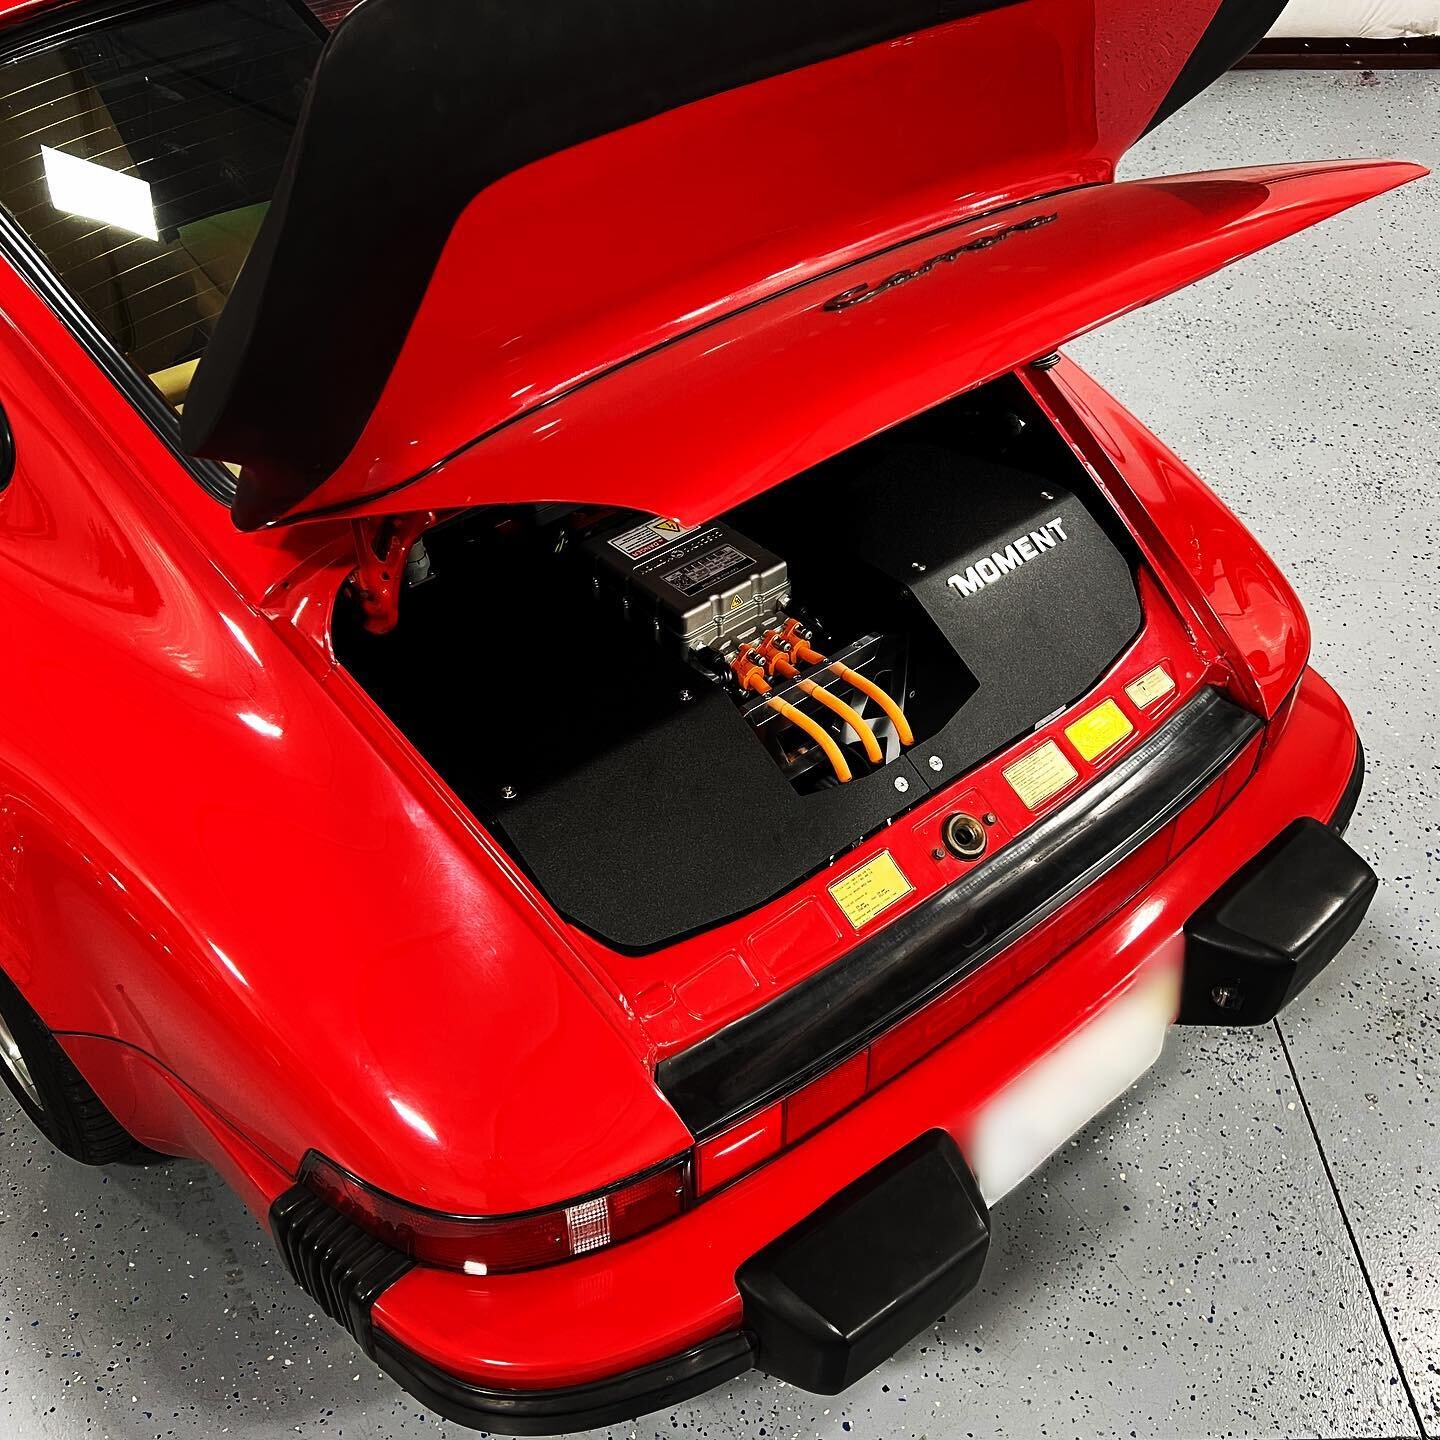 A peek inside our little red rocket&hellip; it can&rsquo;t just blow them away on the street, it has to when you pop the hood too #porsche #porsche911 #classicporsche #classic911 #Moment911 #classicev #electriccar